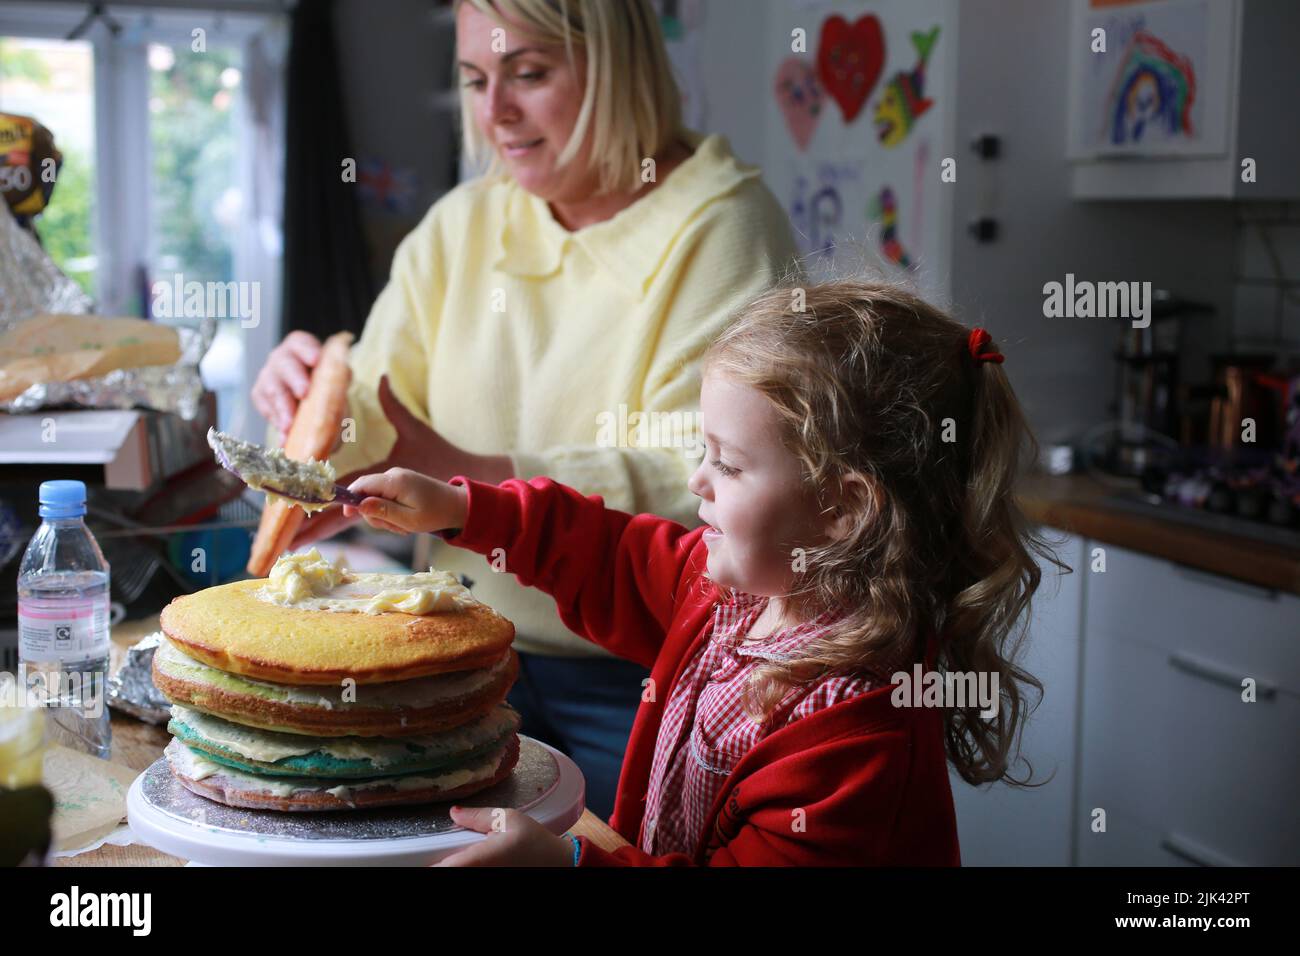 A mum and her young daughter in school uniform baking and decorating a cake, UK Stock Photo